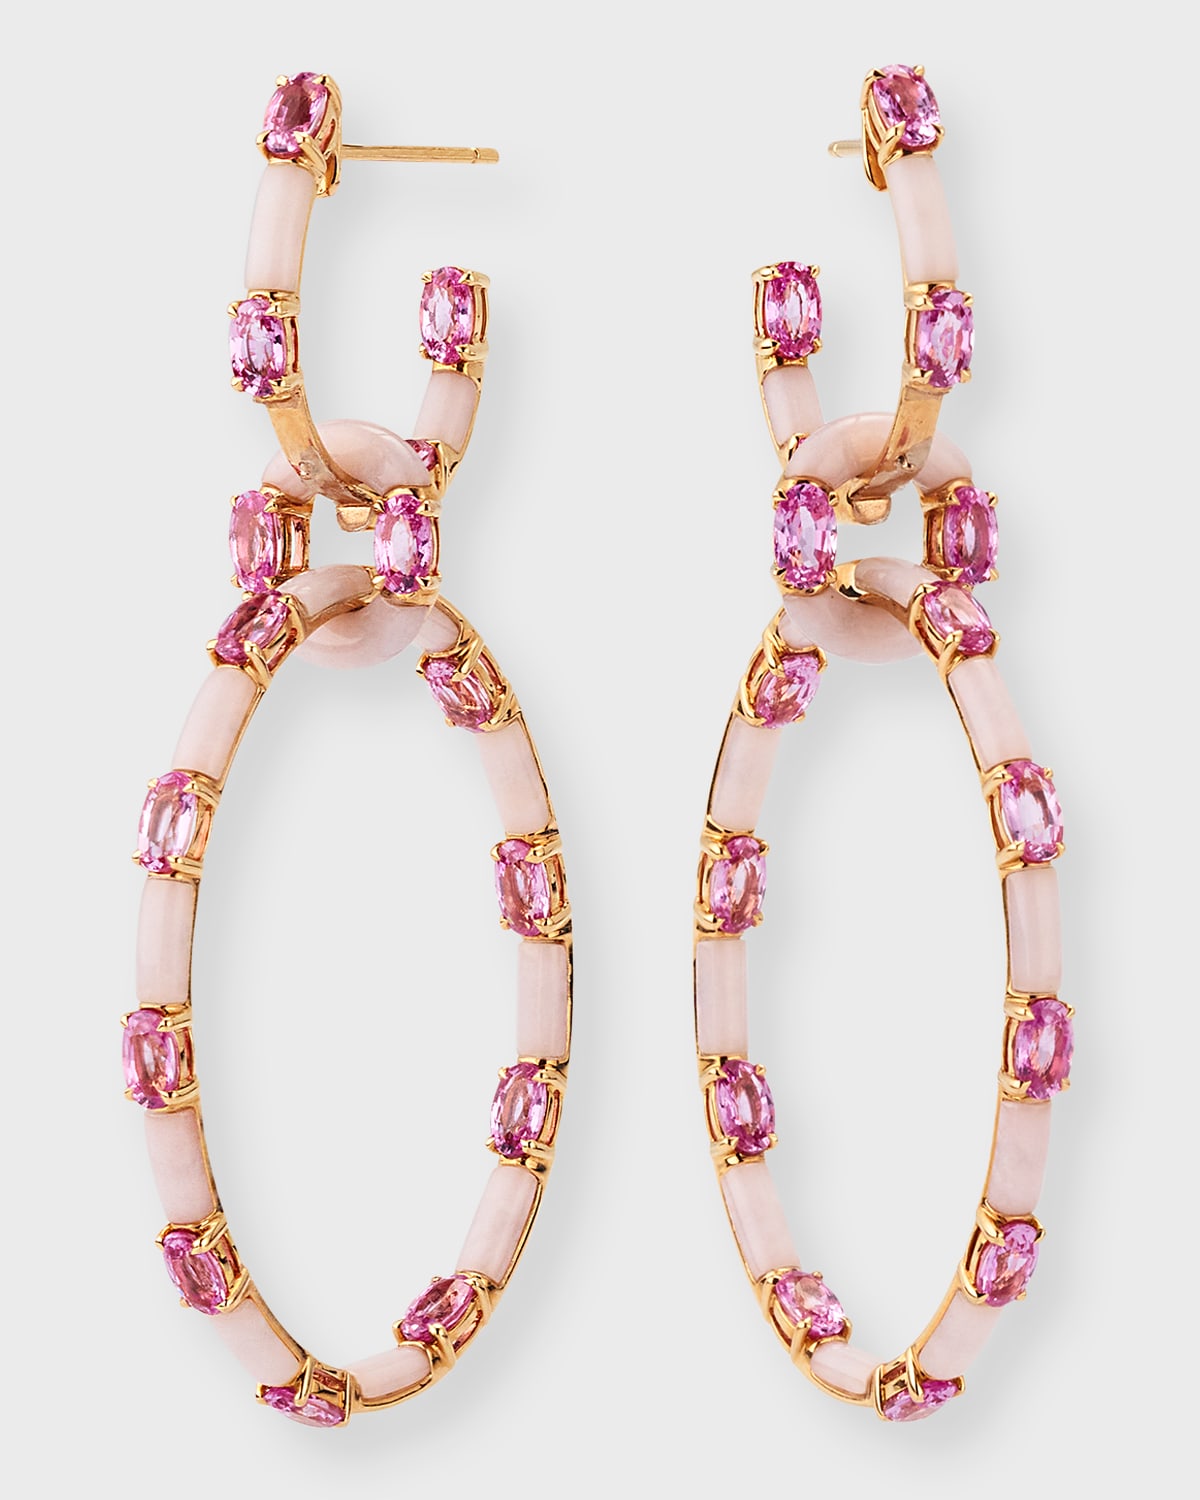 18K Pink Gold Hoop Drop Earrings with Pink Sapphires and Ceramic